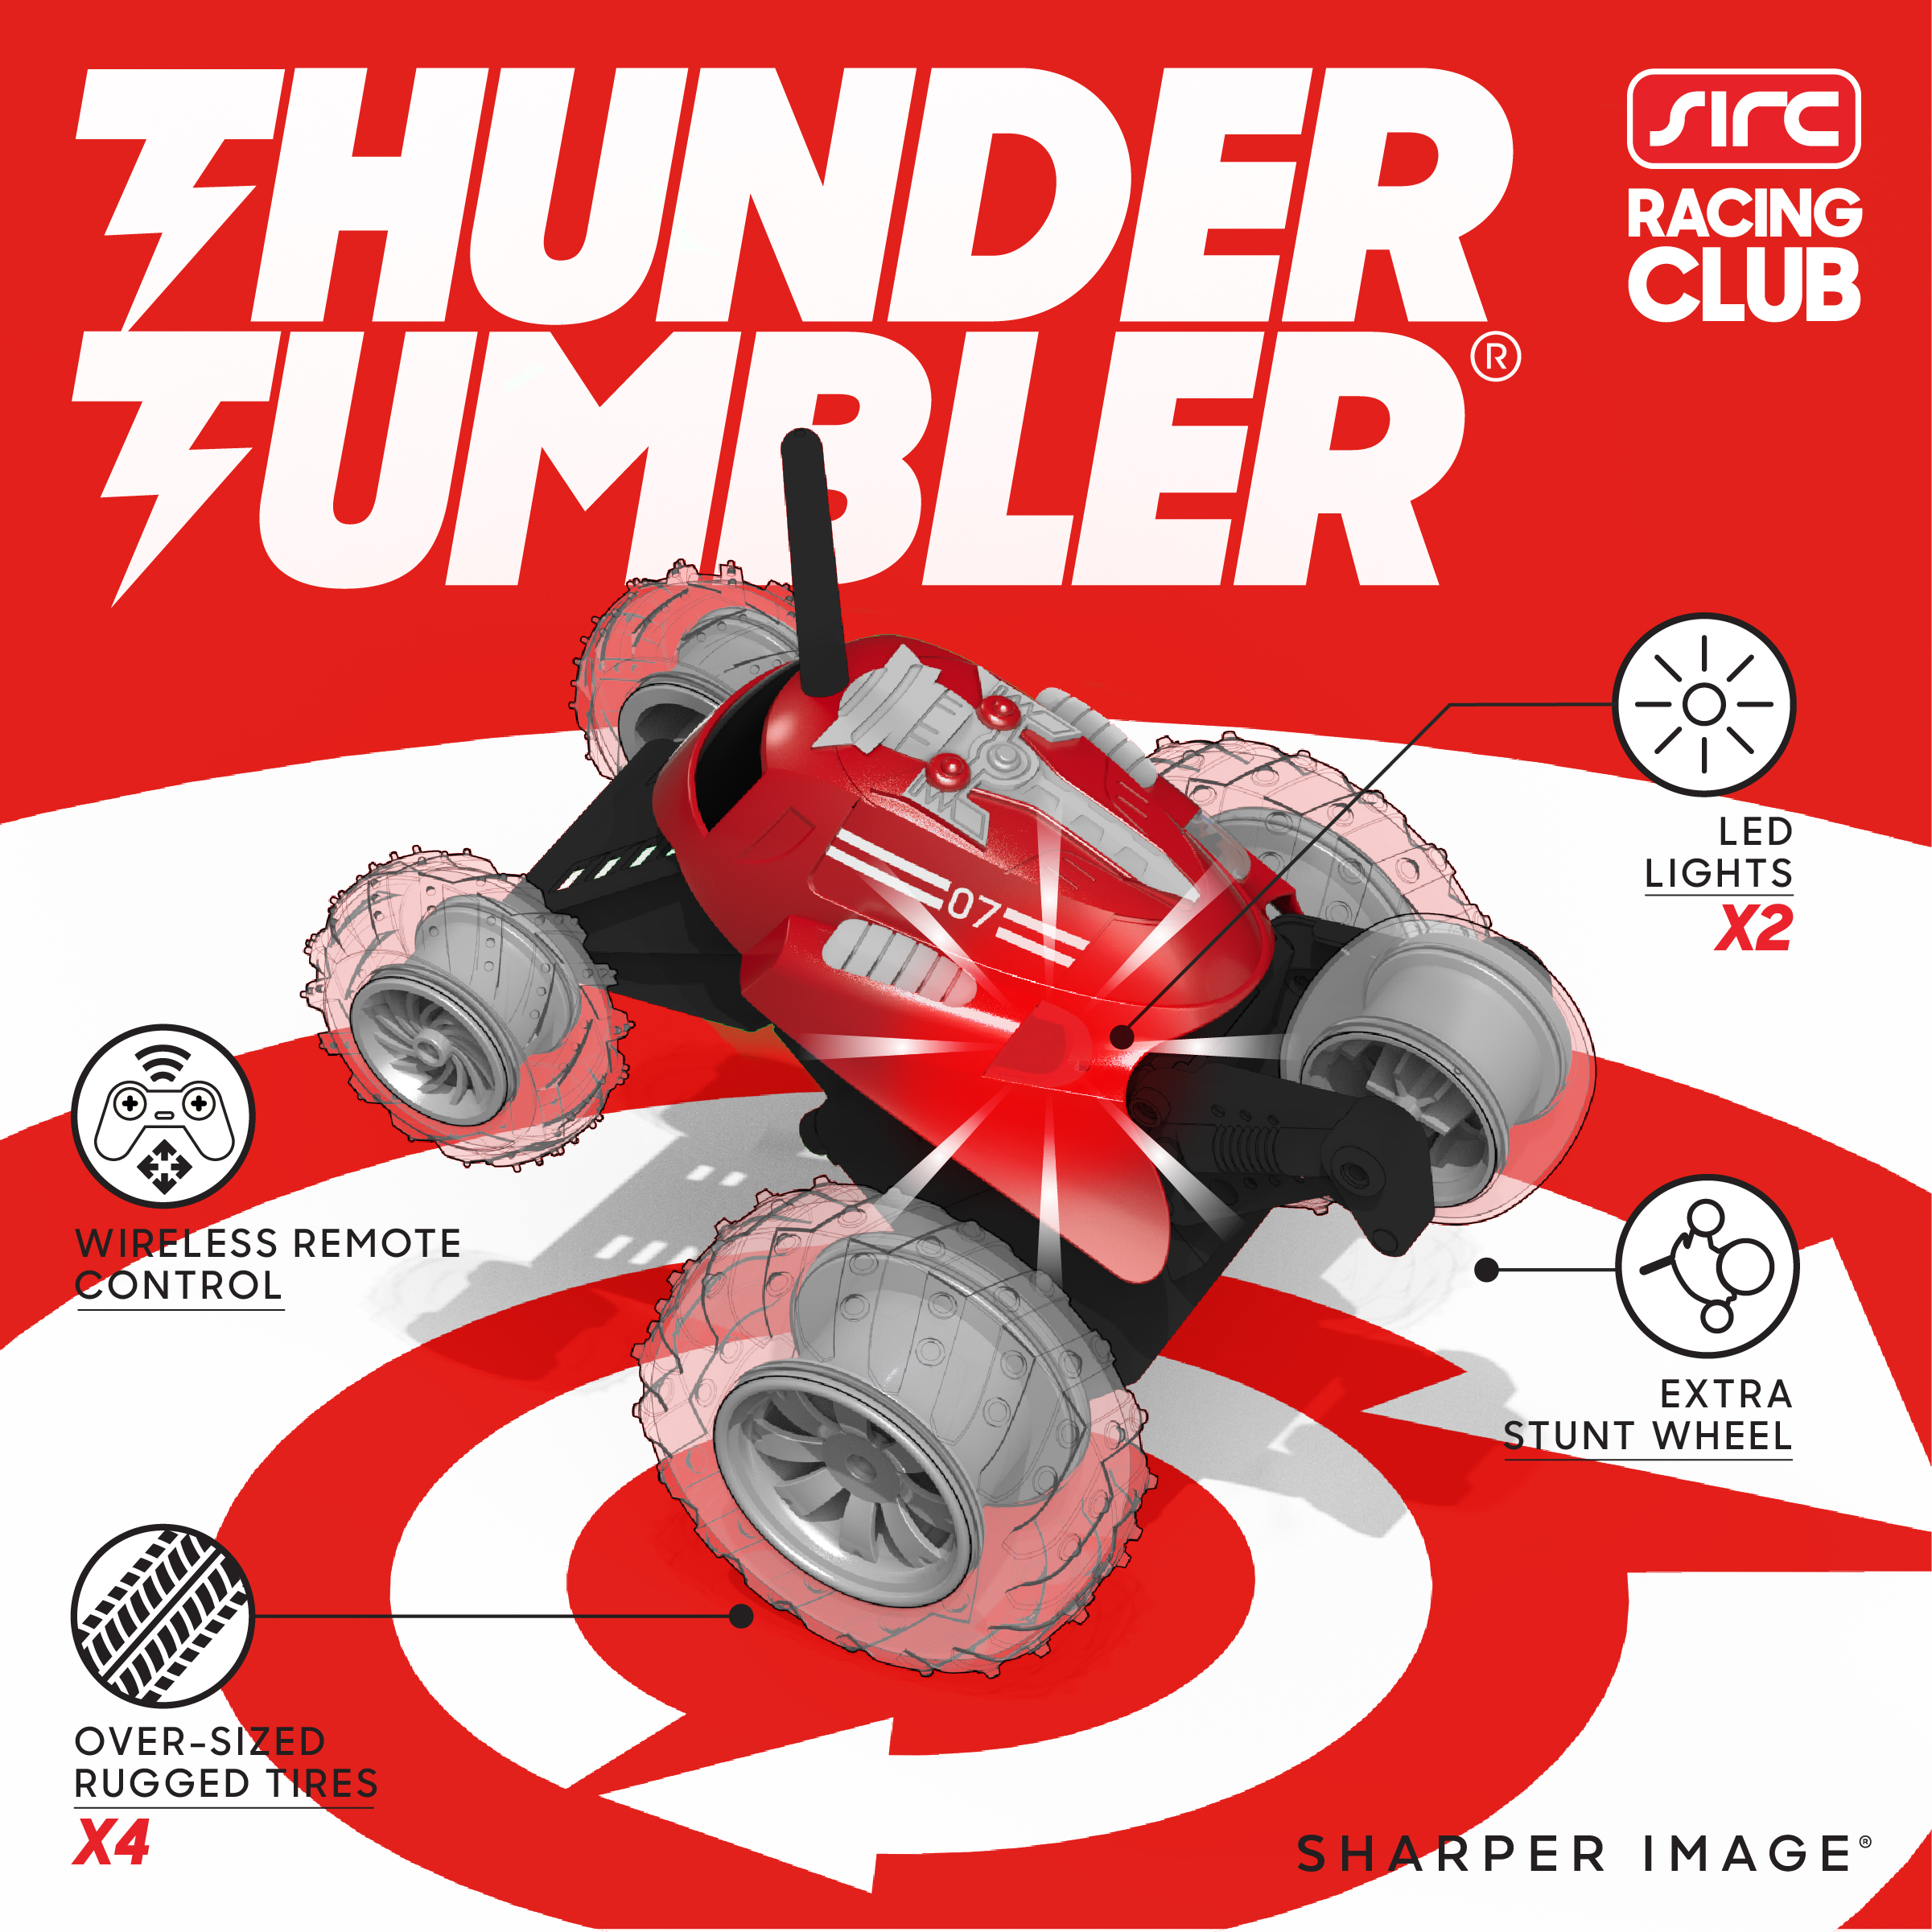 SHARPER IMAGE Thunder Tumbler Toy RC Car for Kids, Remote Control Monster Spinning Stunt Mini Truck for Girls and Boys, Racing Flips and Tricks with 5th Wheel, 49 MHz Black - image 6 of 14